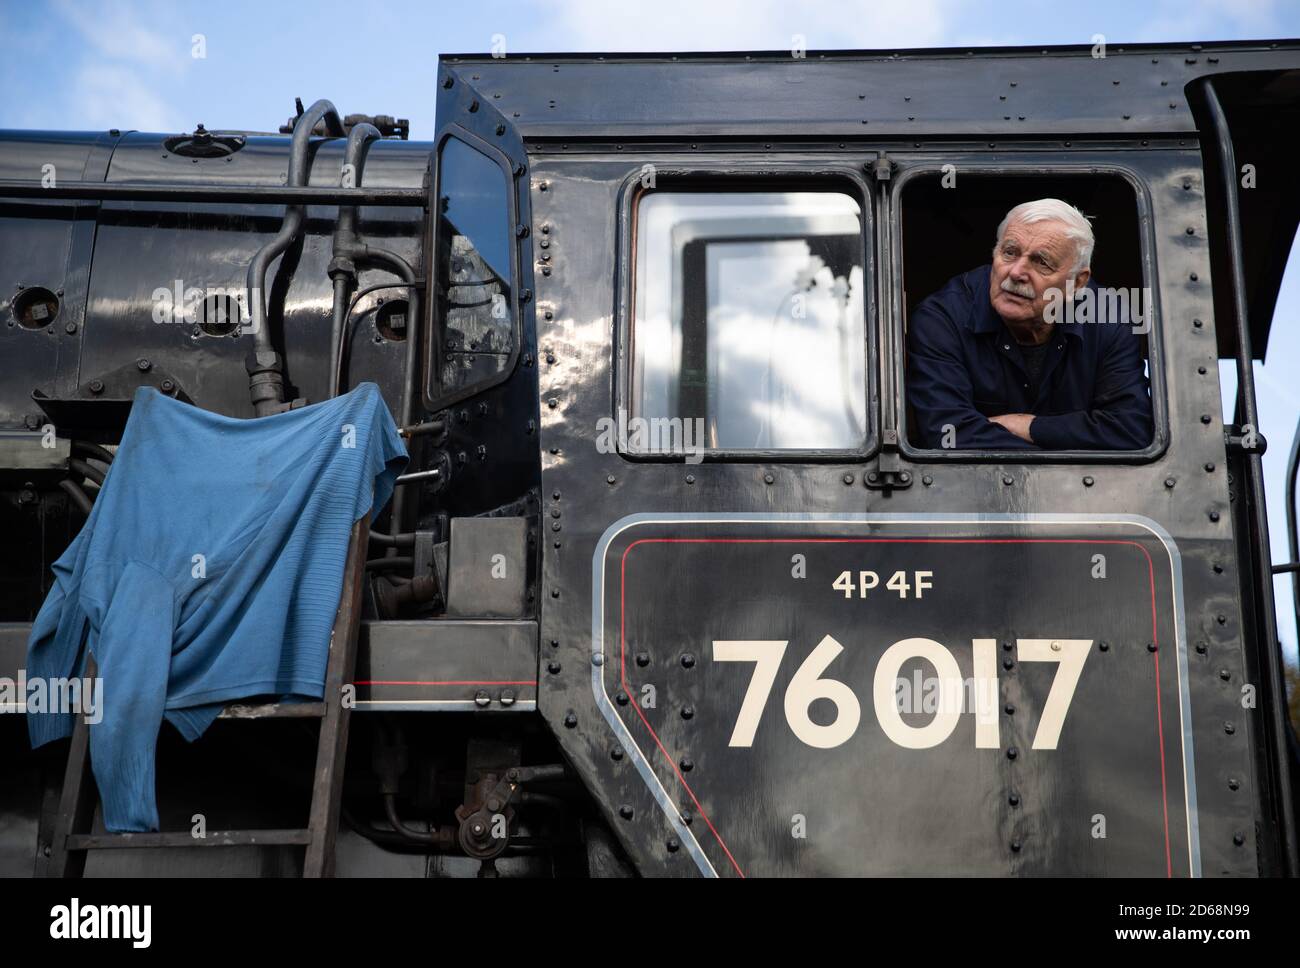 Driver Dave Pallett, who has volunteered on the Mid Hants Railway for over 25 years, looks out of the cab of the British Railways Standard Class 4MT steam locomotive 76017 as he poses for a photograph at Ropley station, ahead of this weekend's Autumn Steam Gala on the Mid Hants Railway's Watercress Line. Stock Photo